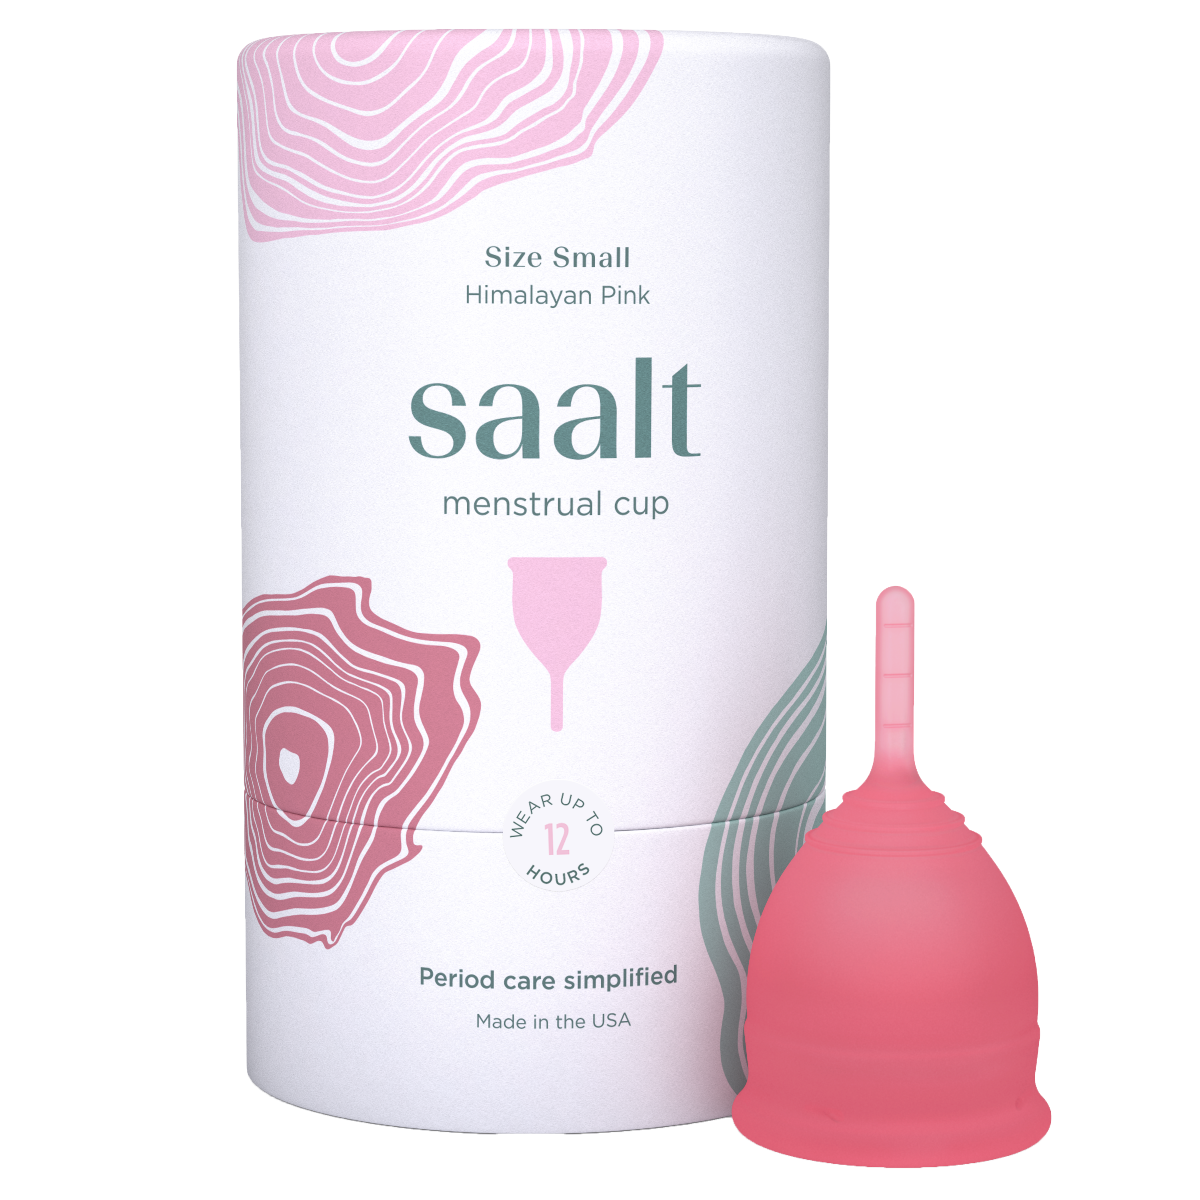 Saalt Menstrual Cup | Himalayan Pink Small | The Period Co.